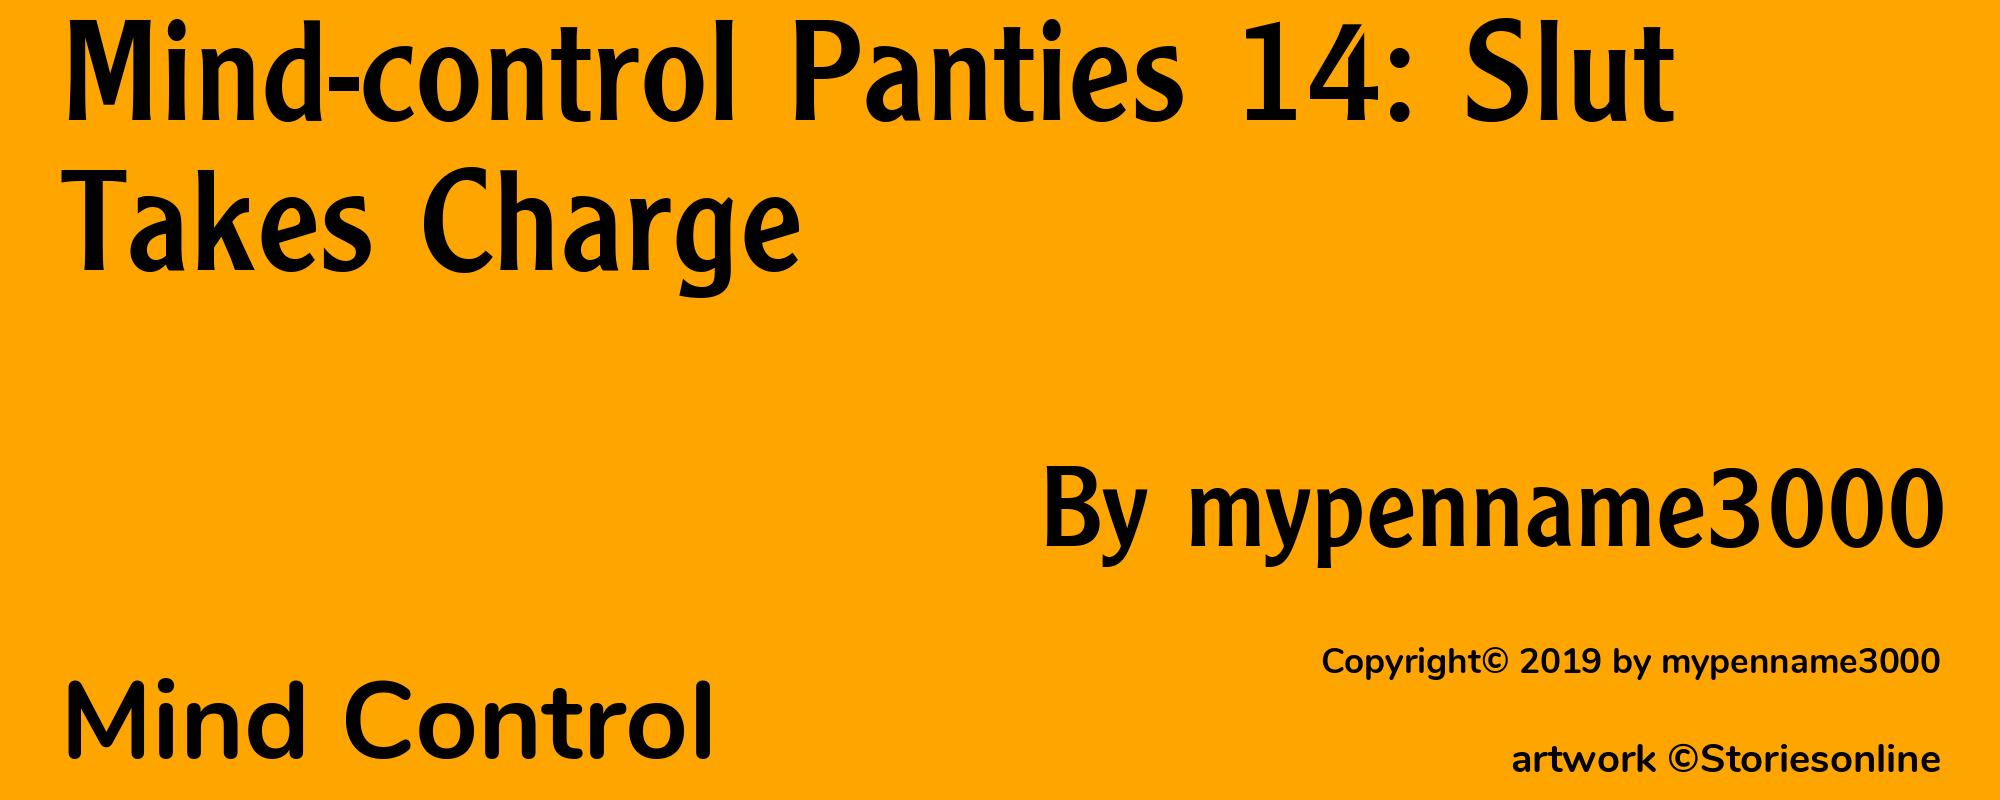 Mind-control Panties 14: Slut Takes Charge - Cover